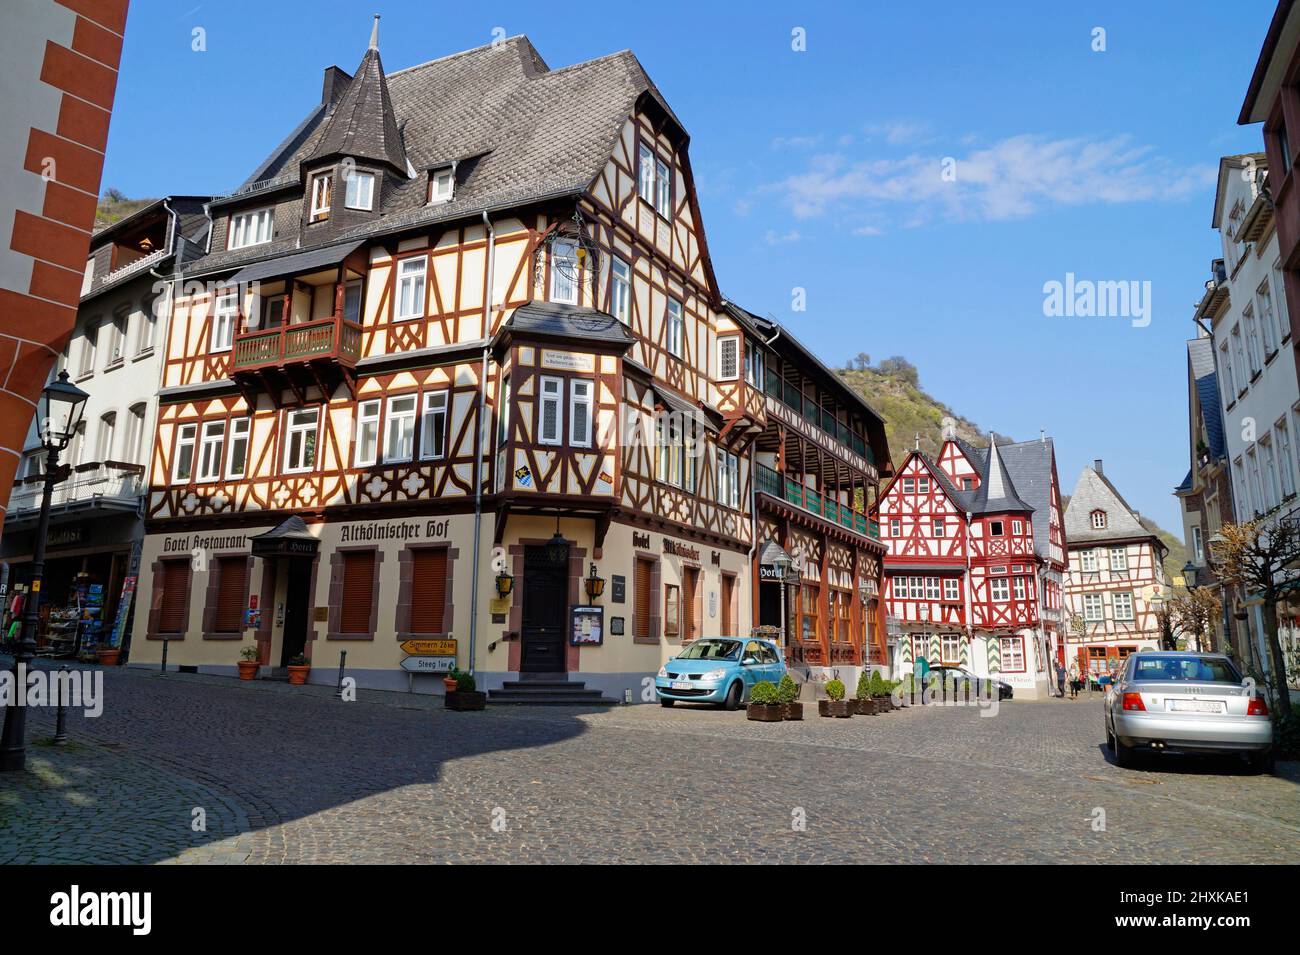 quaint timber-framed houses of town of Bacharach on Rhein or Rhine in Germany ( Upper Middle Rhine Valley at Bacharach in Rhineland-Palatinate) Stock Photo